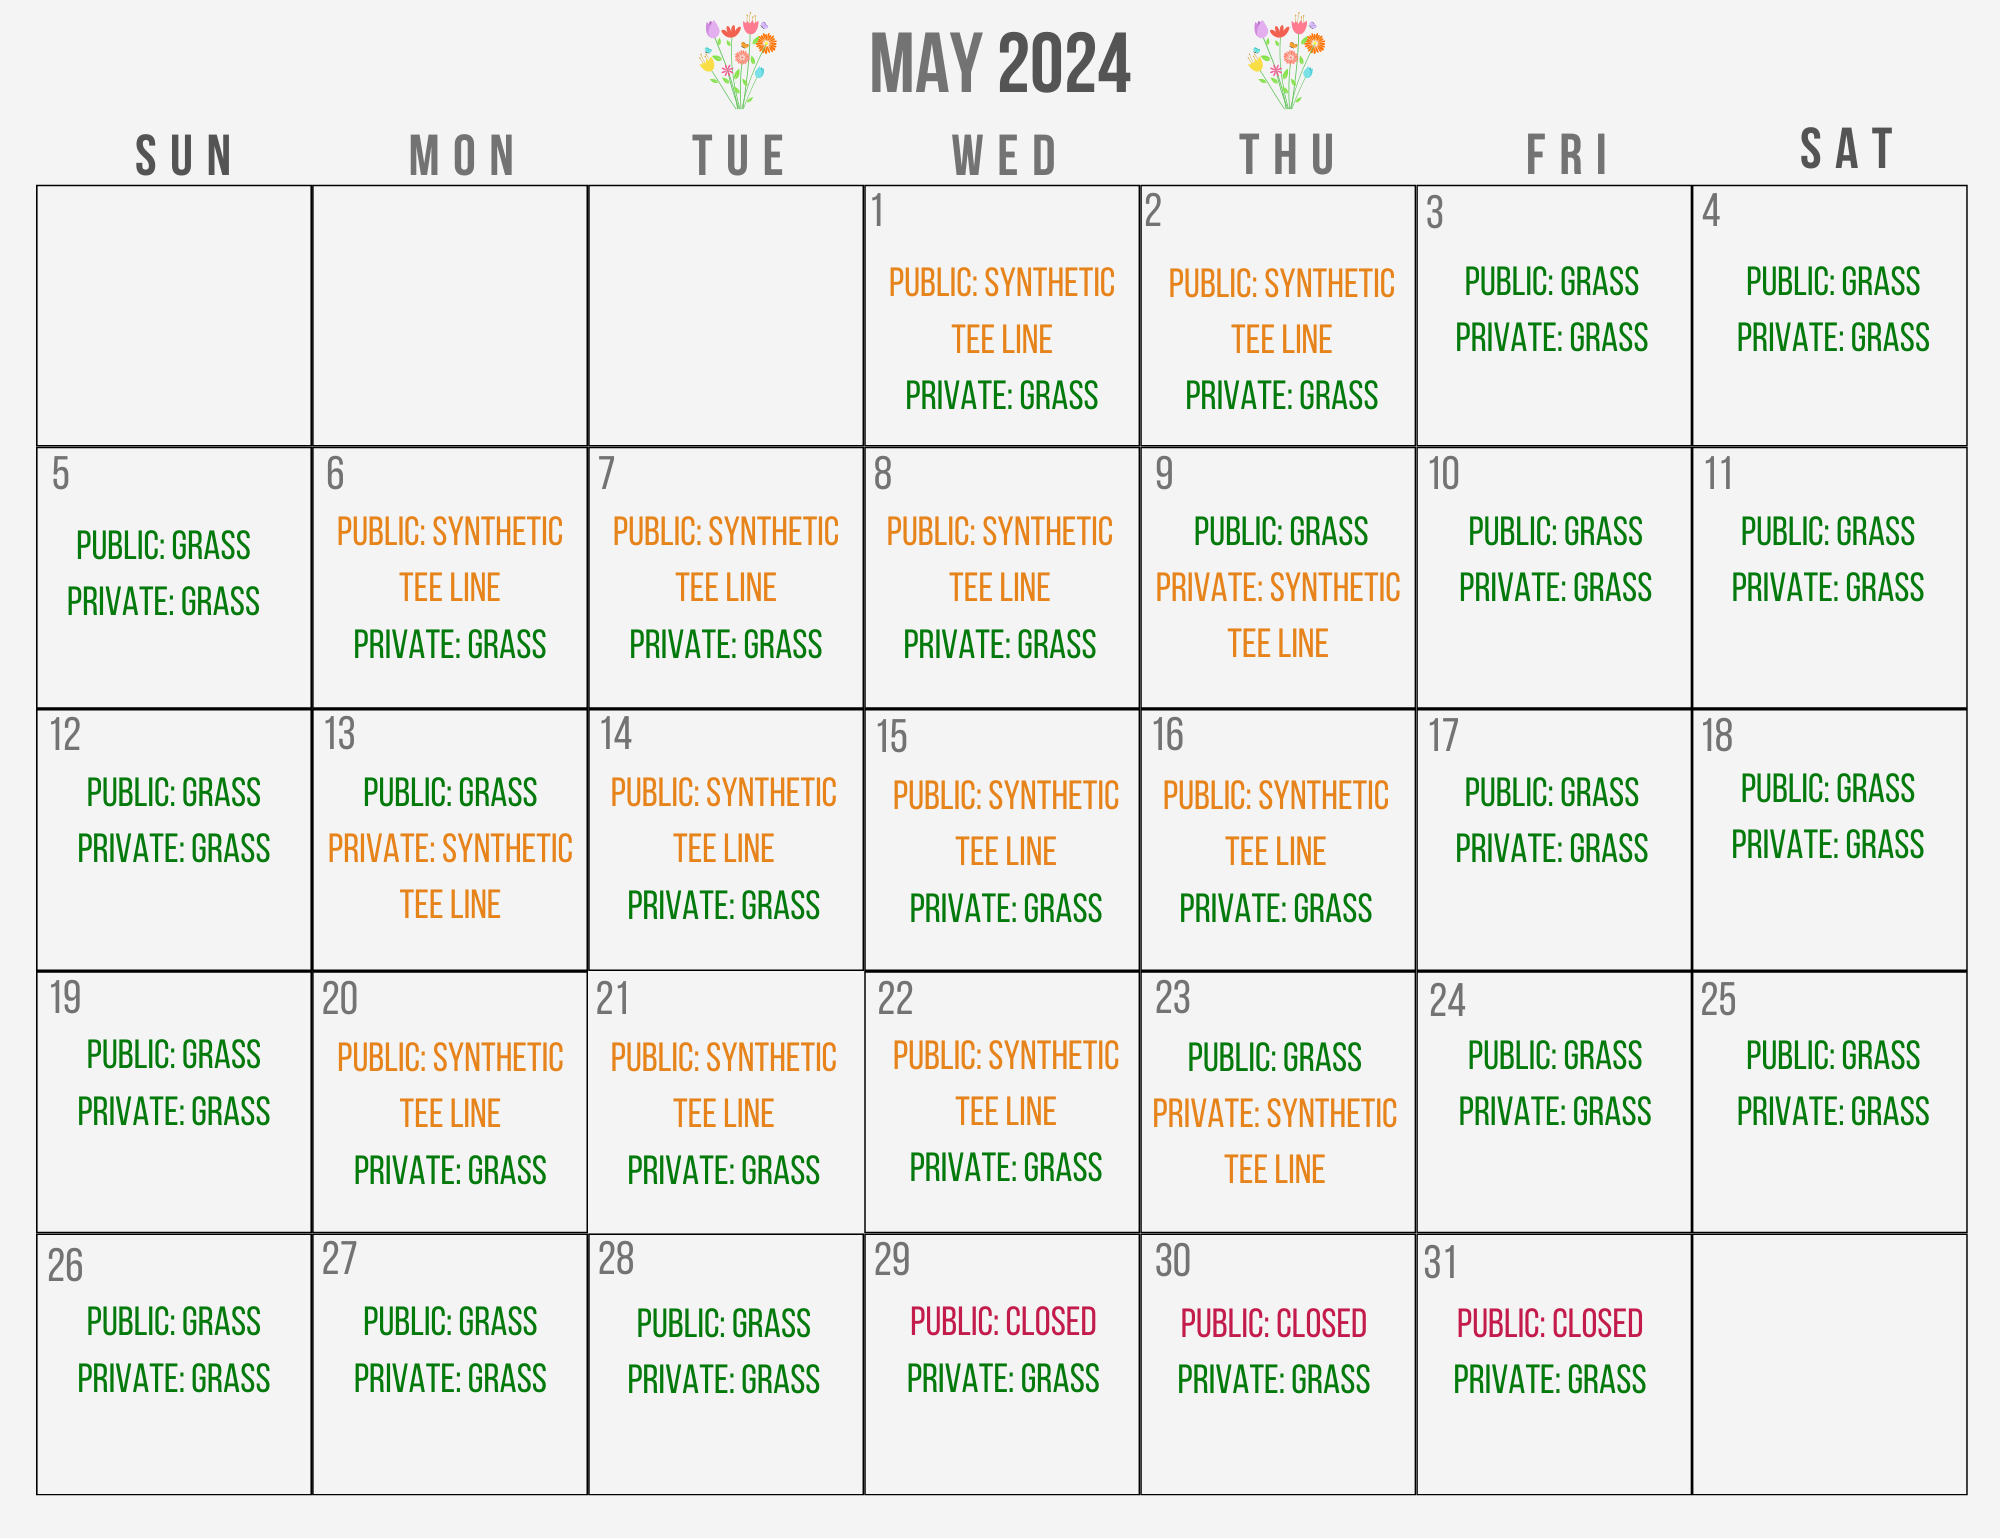 Driving Range Rotation Schedule May 2024